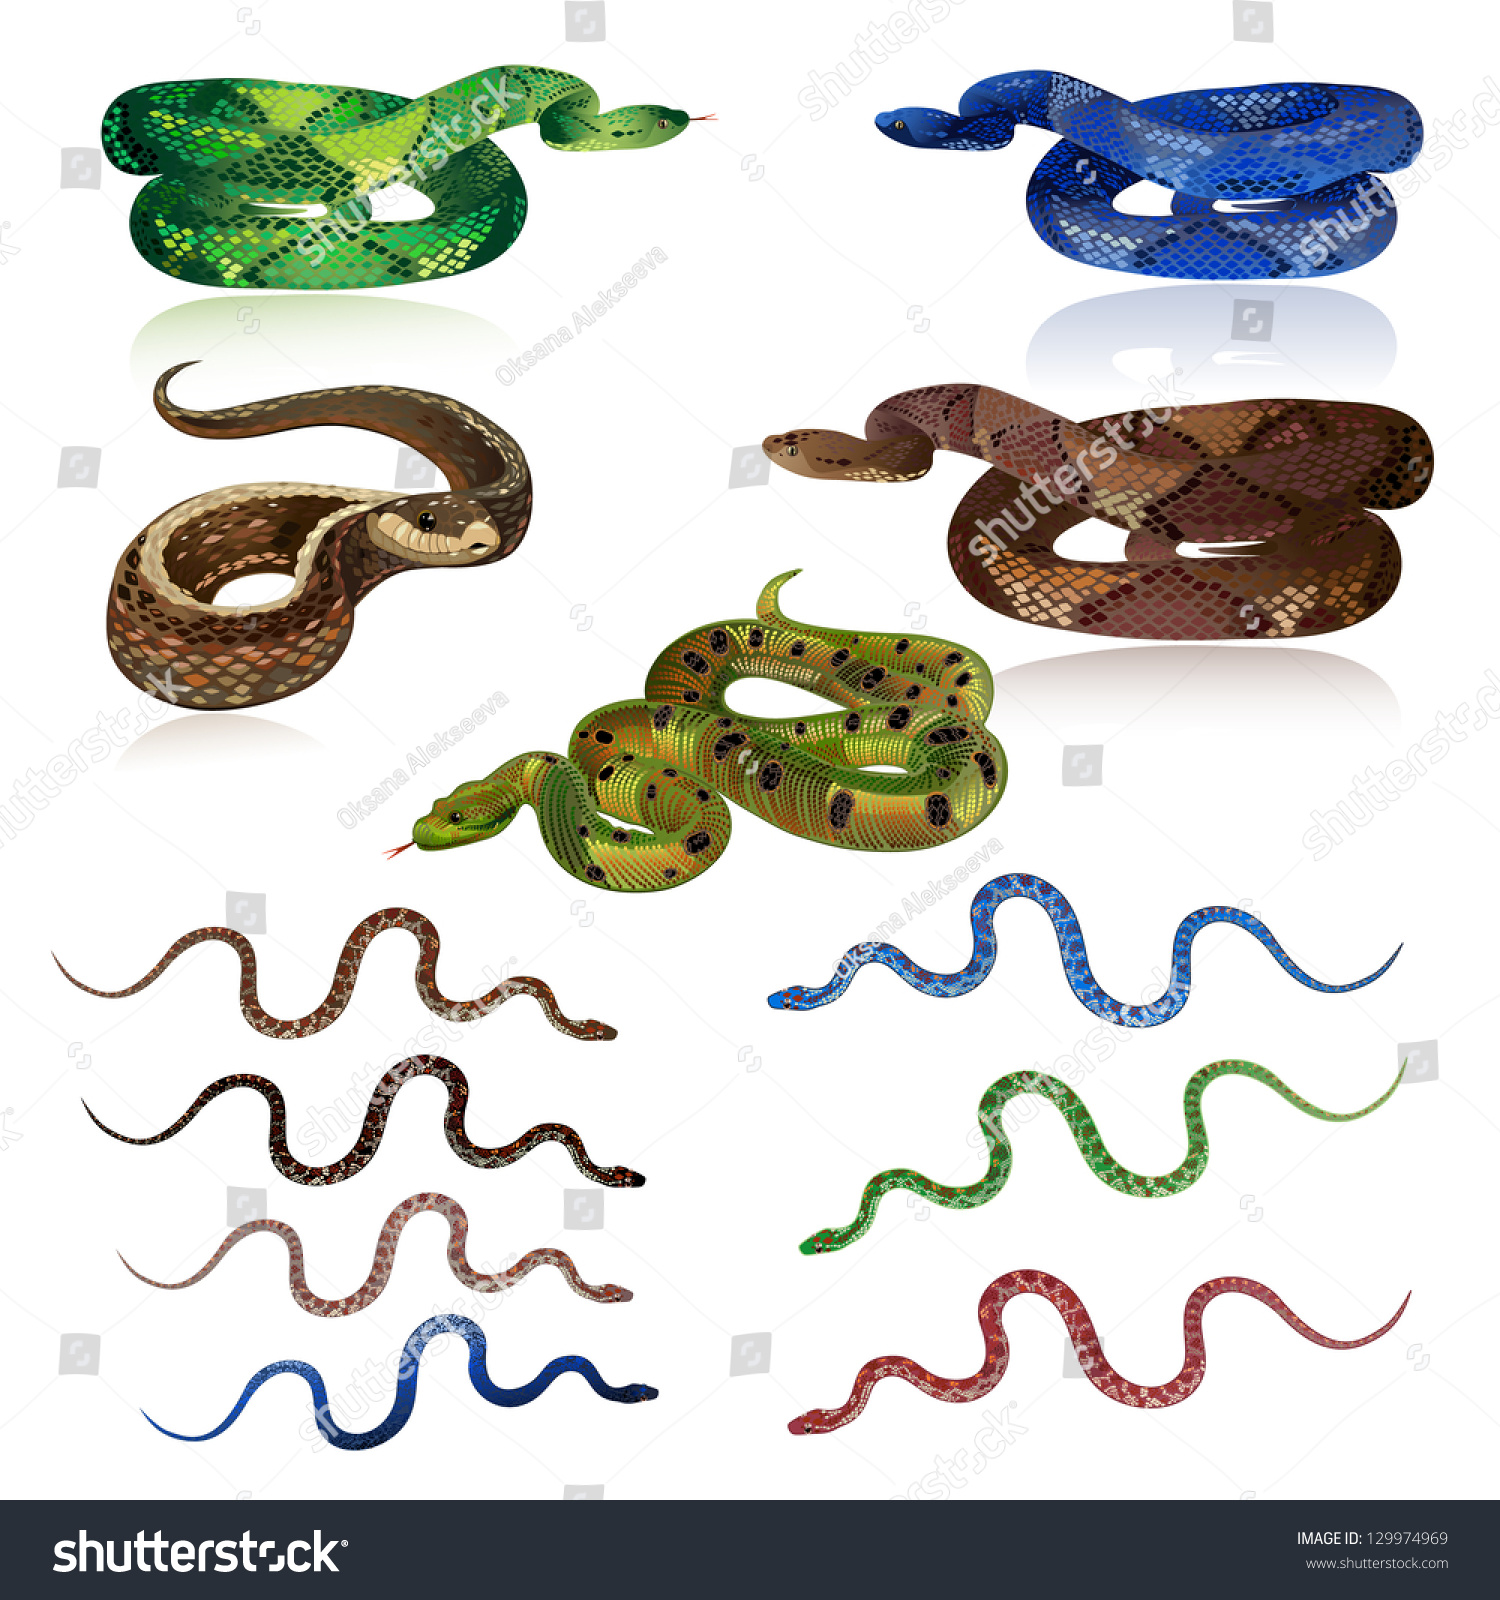 Set Pretty Realistic Snakes Stock Vector (Royalty Free) 129974969